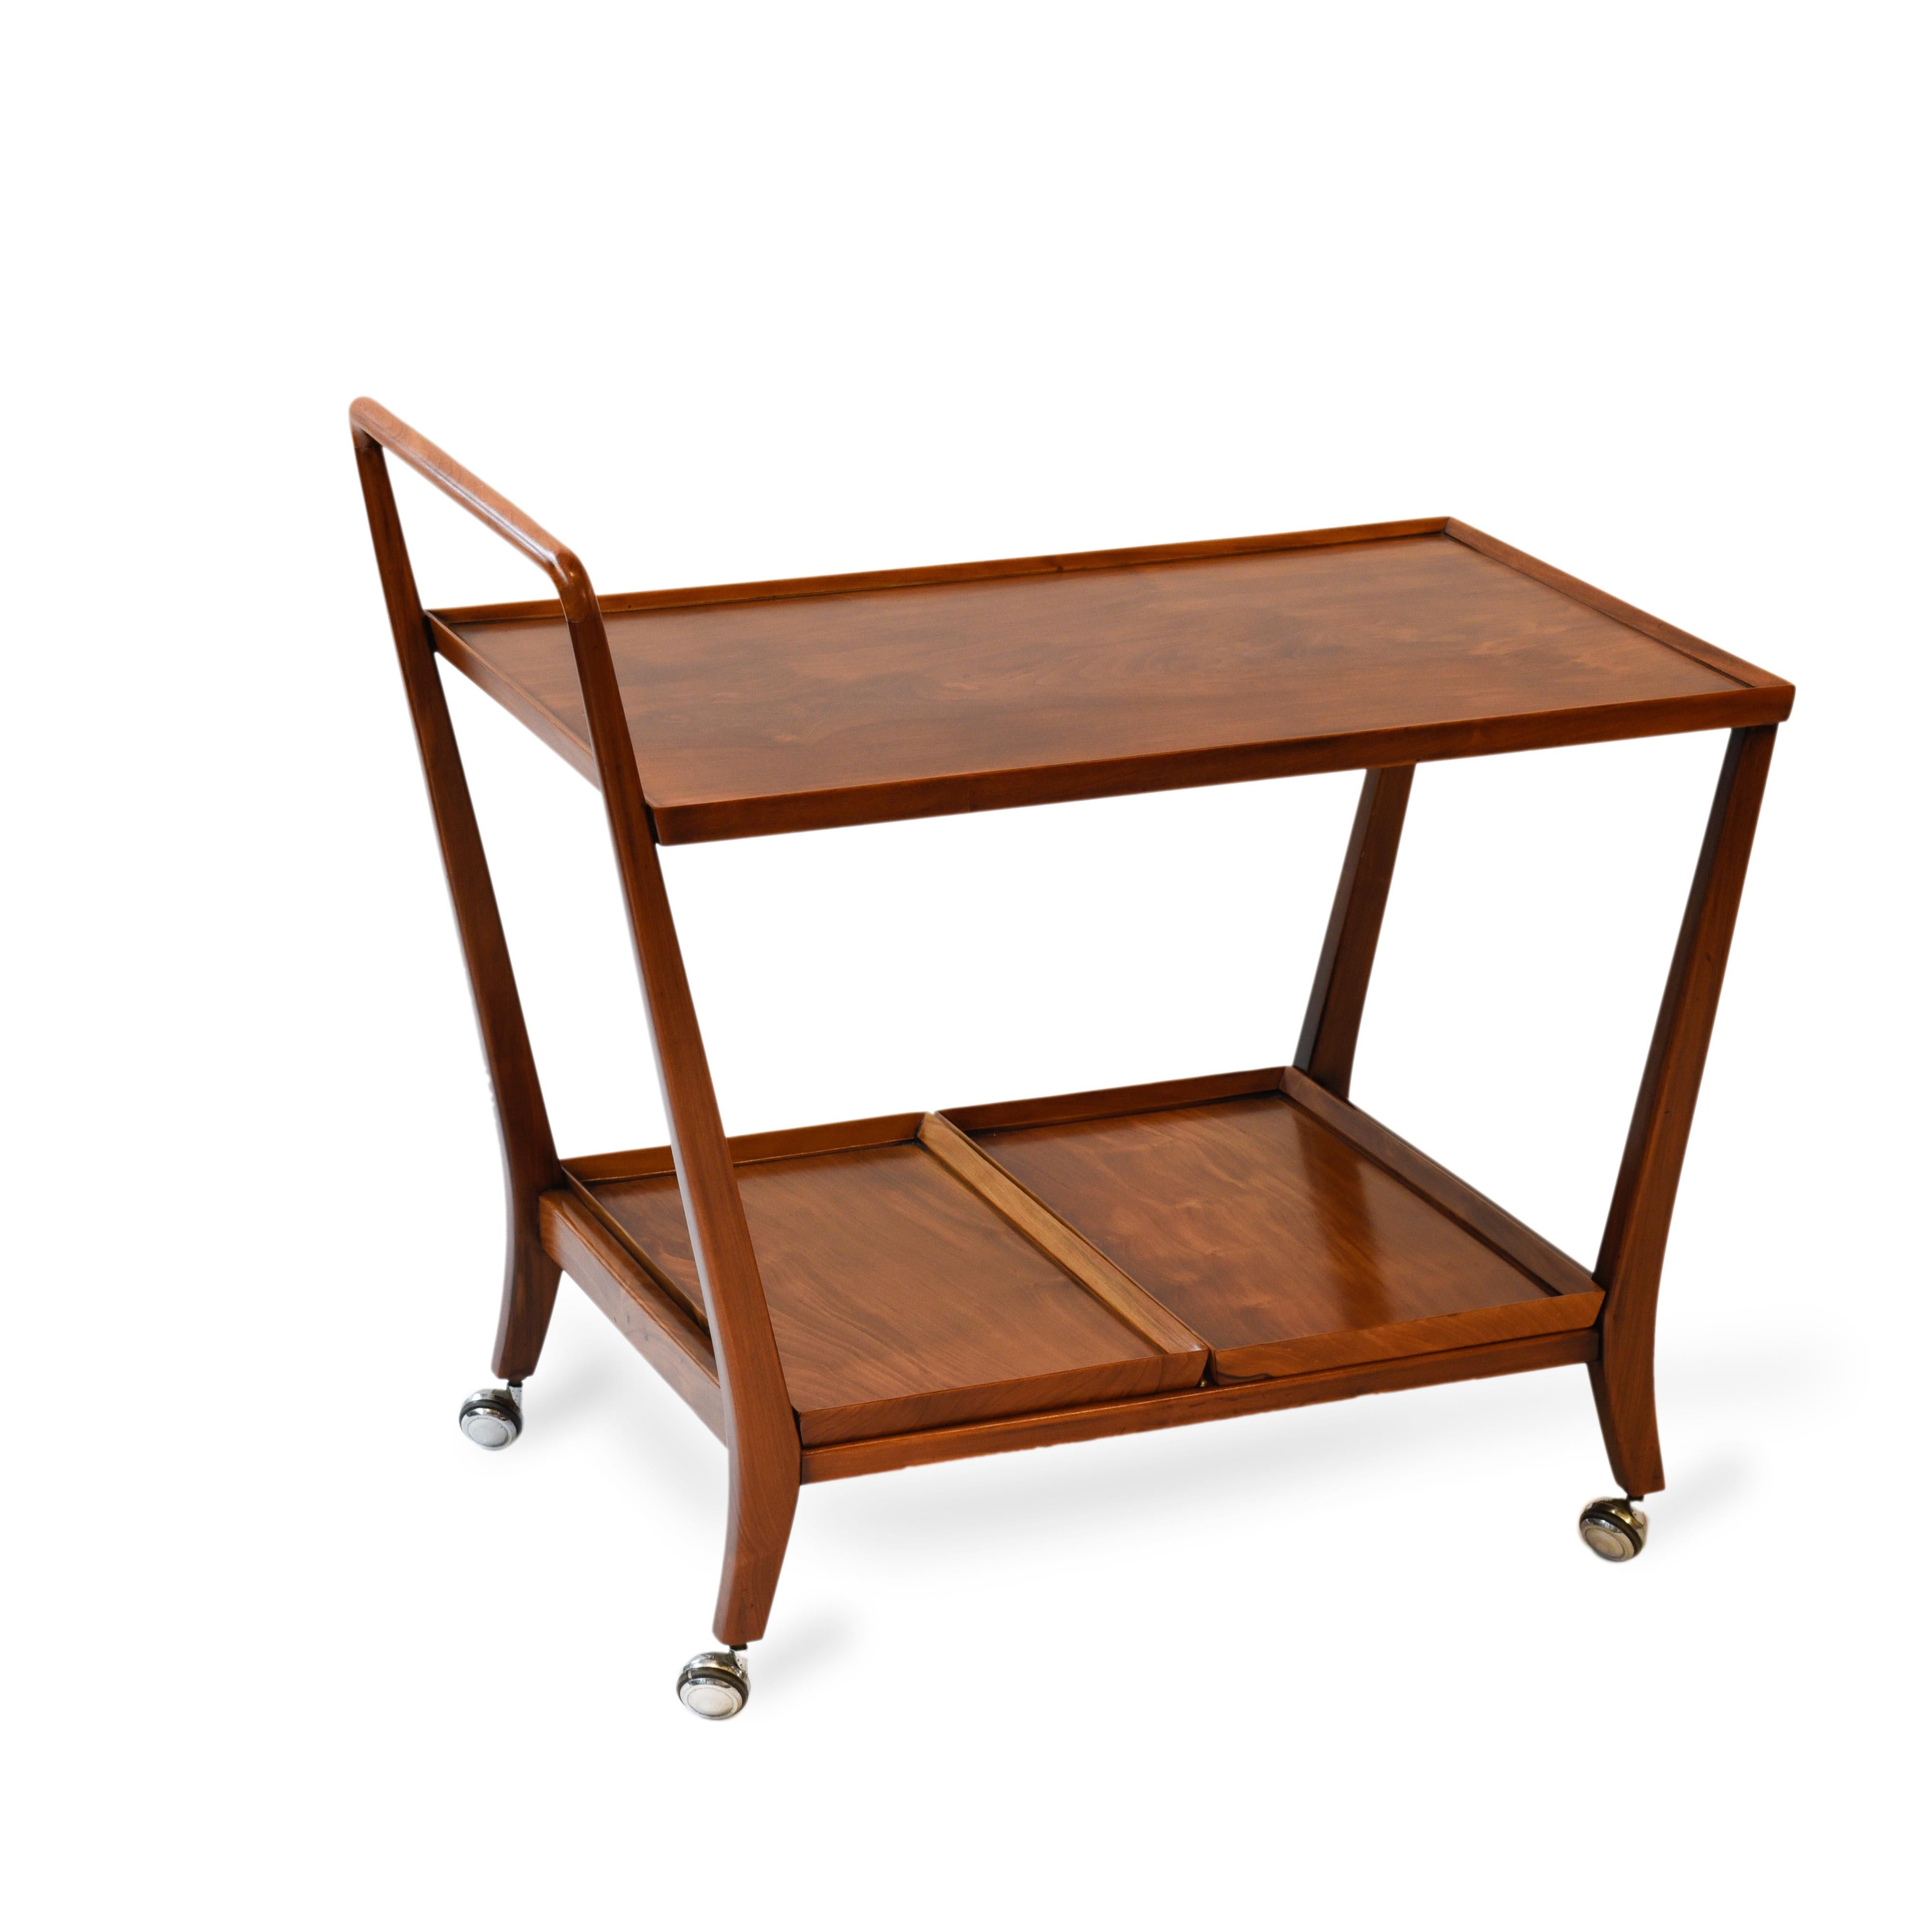 Midcentury Brazilian teacart in caviúna wood, 1960s.

Versatile tea cart built in wood caviúna. Its lower trays can be removed and used to serve the drinks.
     